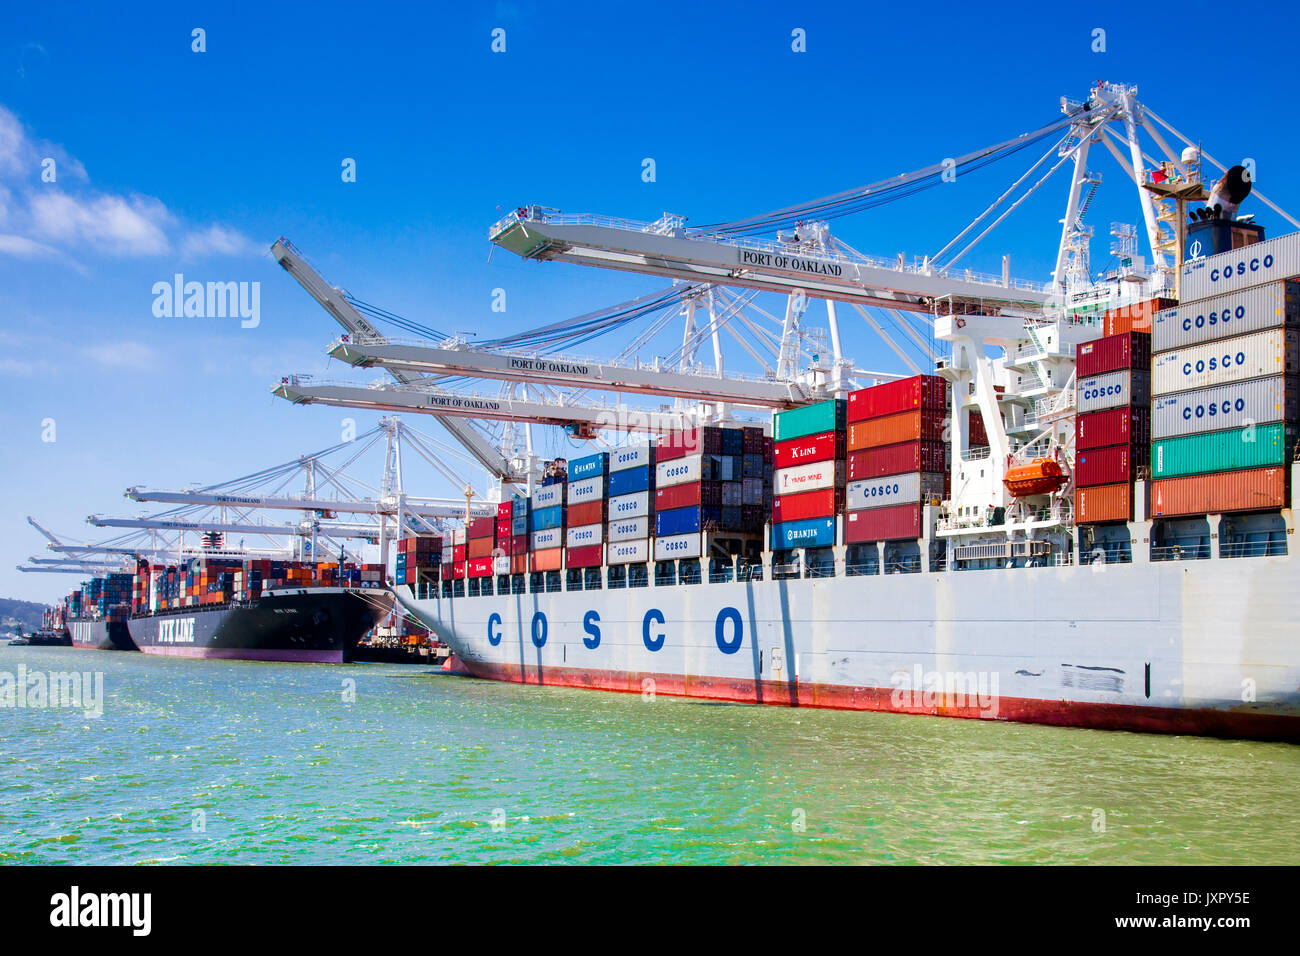 OAKLAND - MAY 26: The Port of Oakland in Oakland, California on May 26, 2012. As the fourth busiest container port in the country, it is now a major e Stock Photo